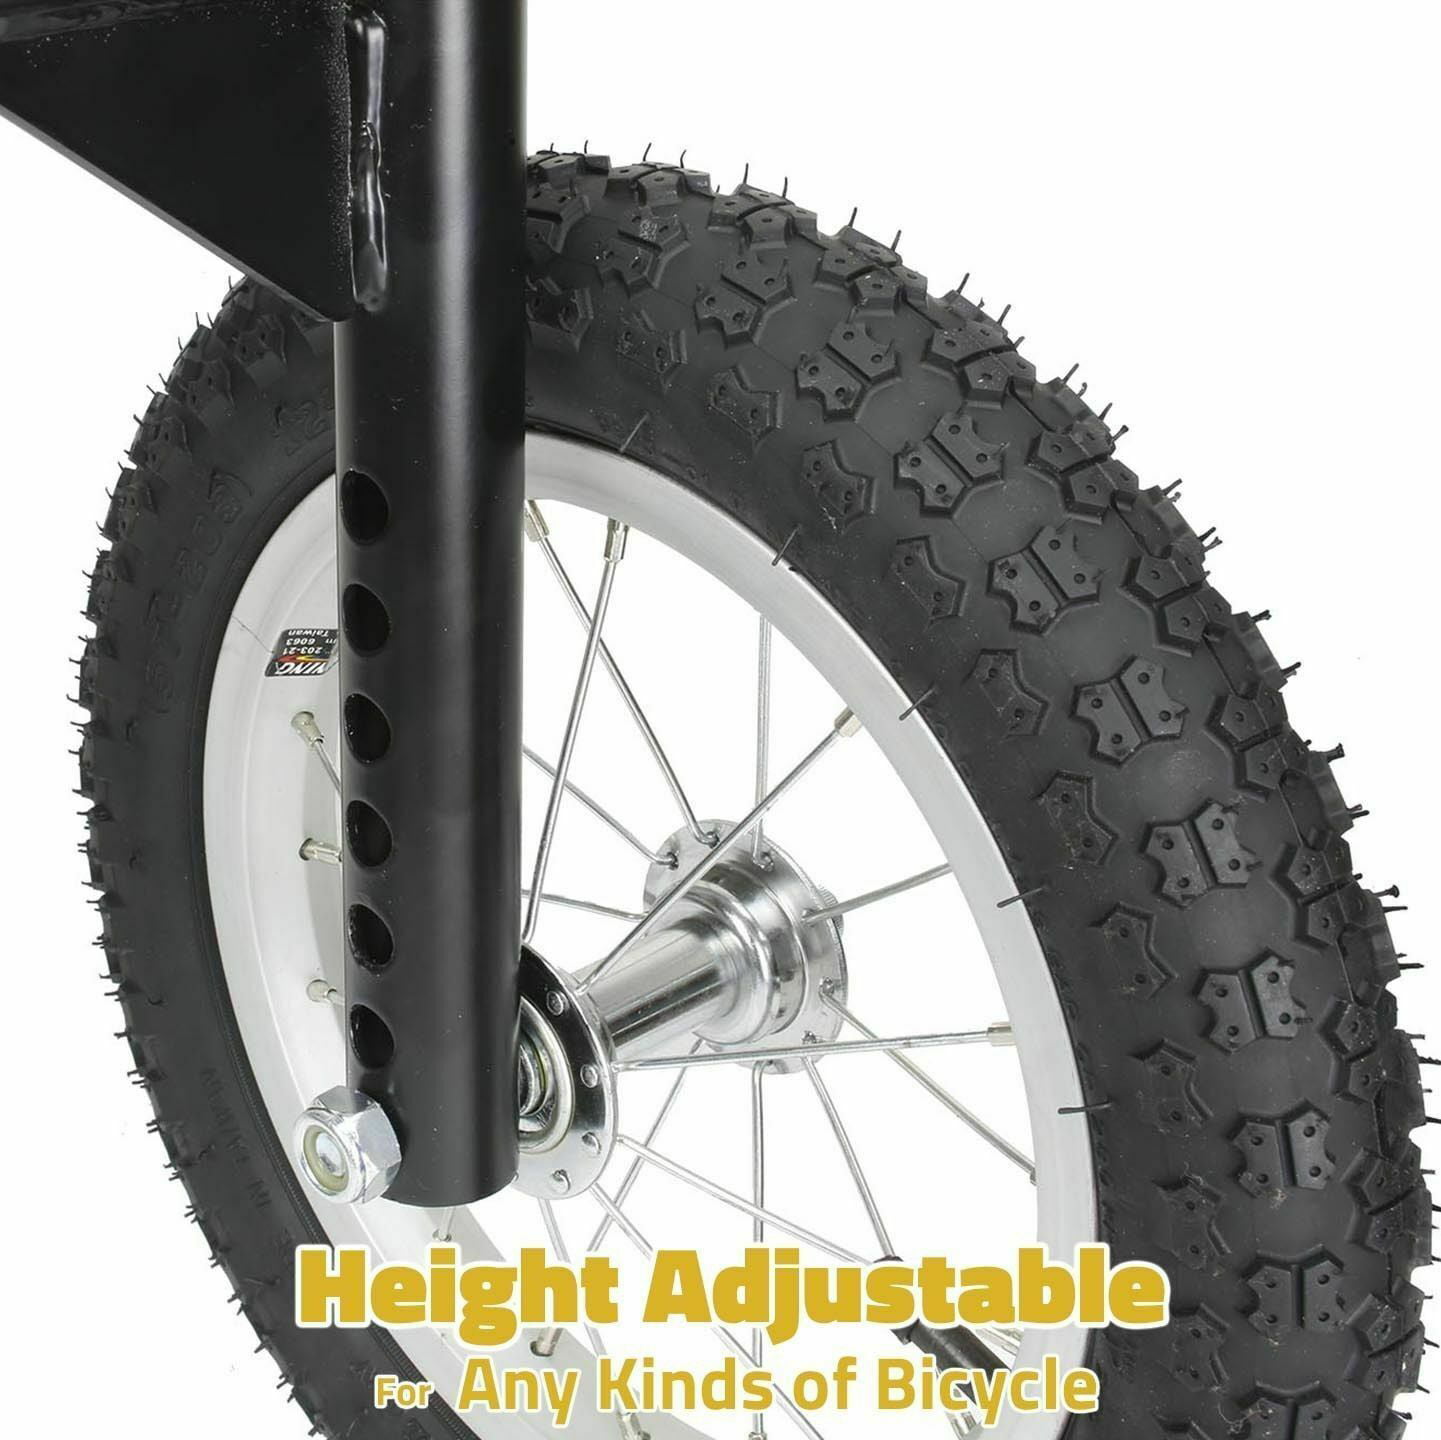 cyclingdeal adjustable adult bicycle bike training wheels fits